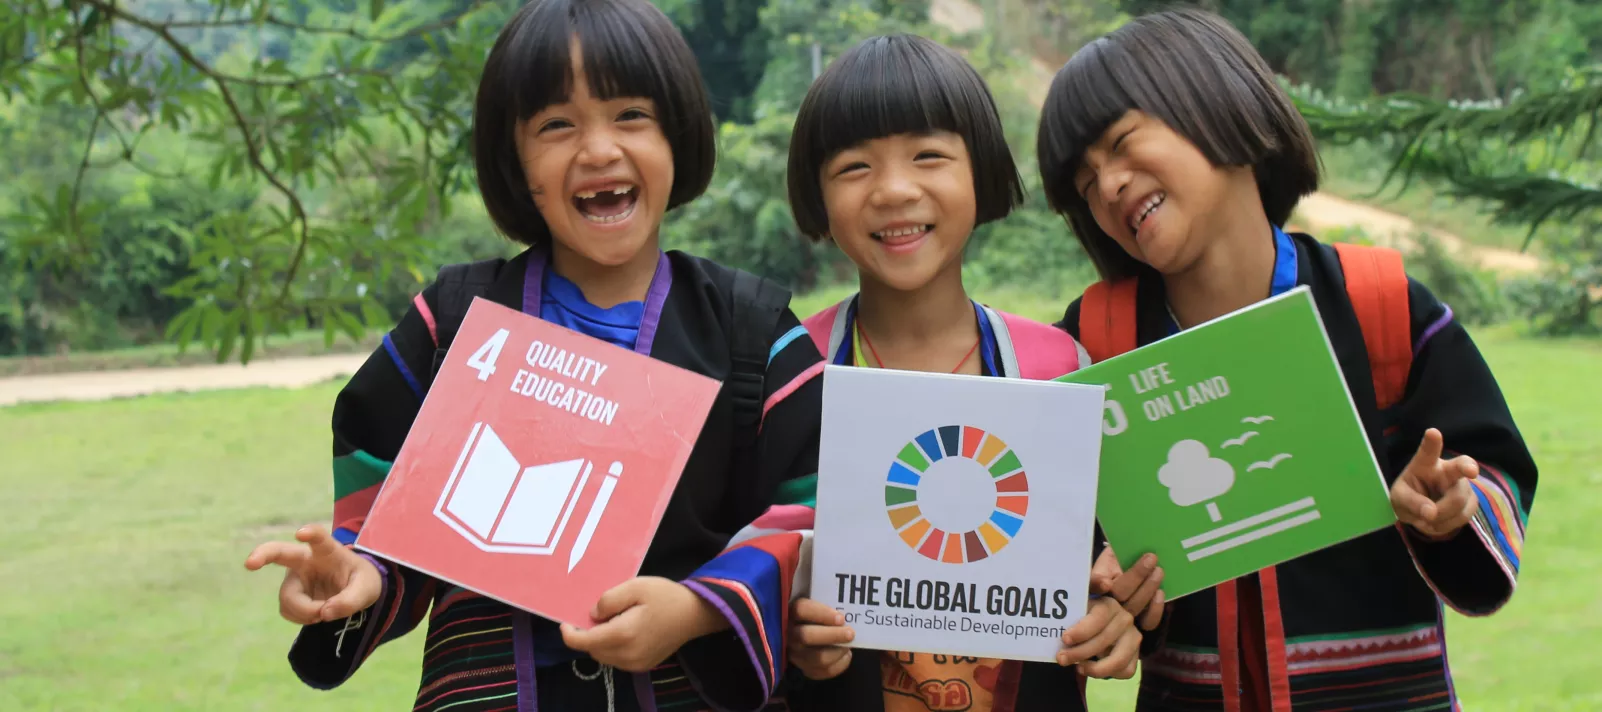 Three young girls smile outside in Thailand while posing with posters for the SDGs.